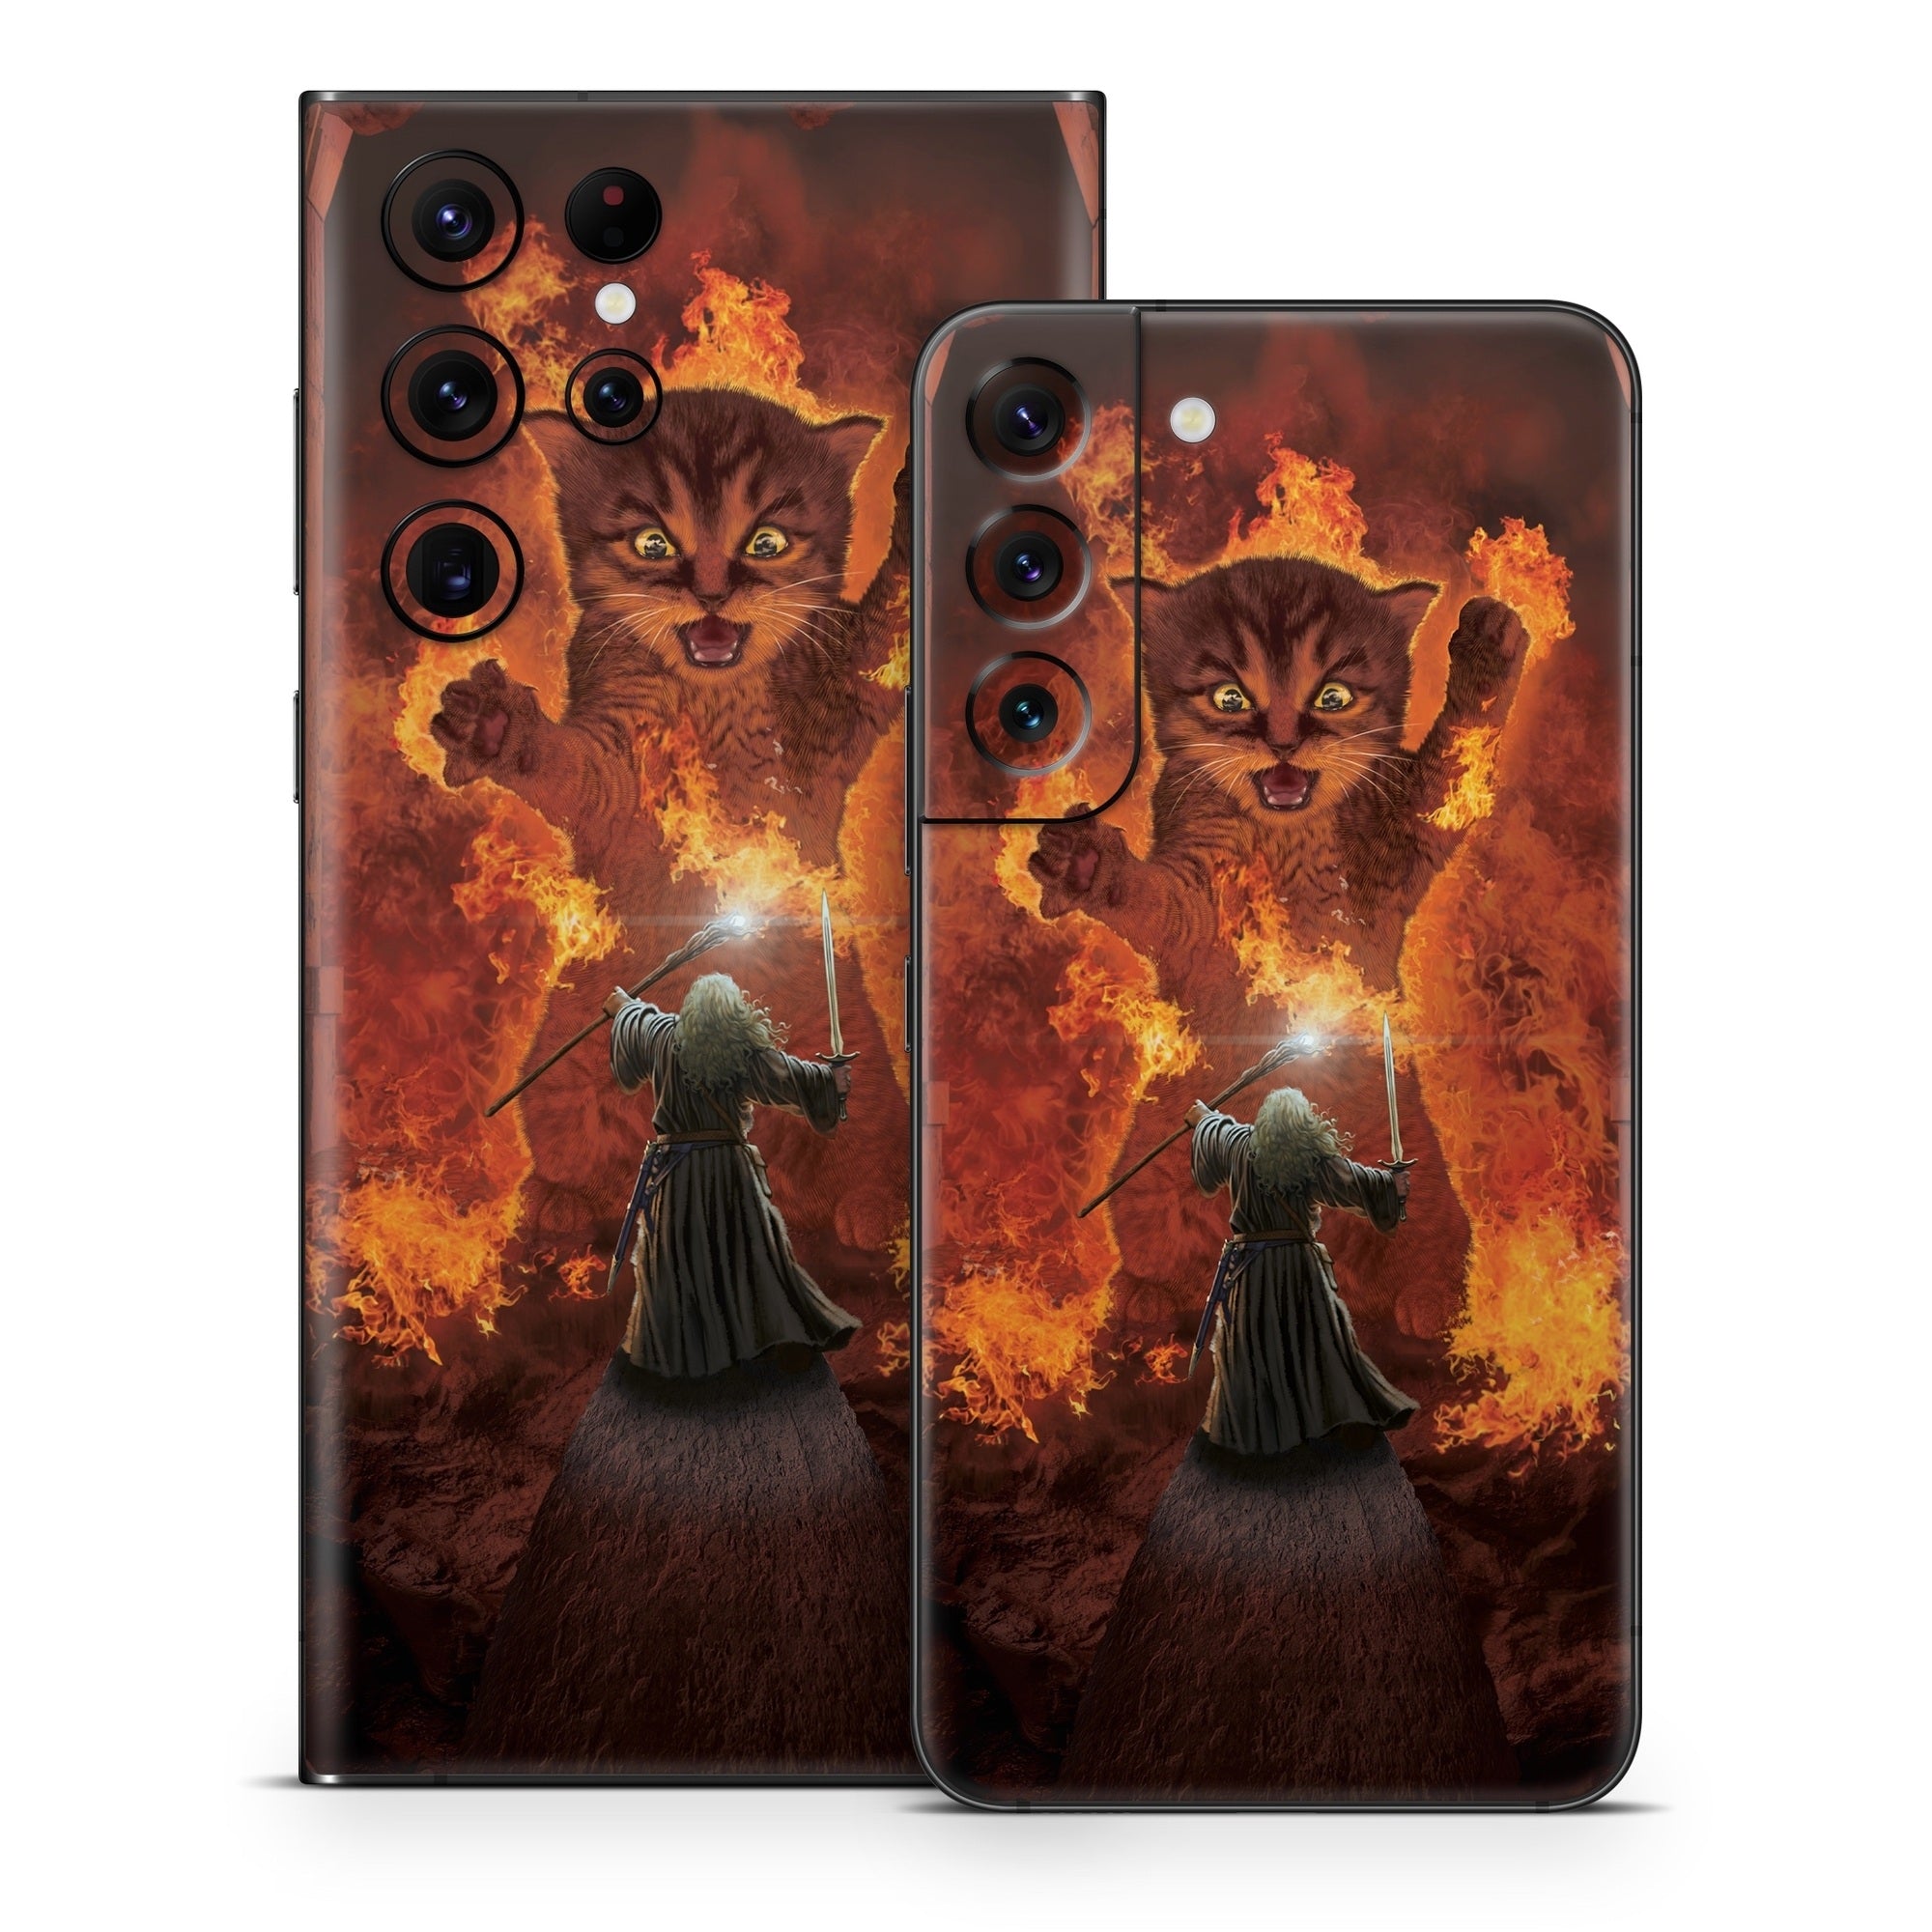 You Shall Not Pass - Samsung Galaxy S22 Skin